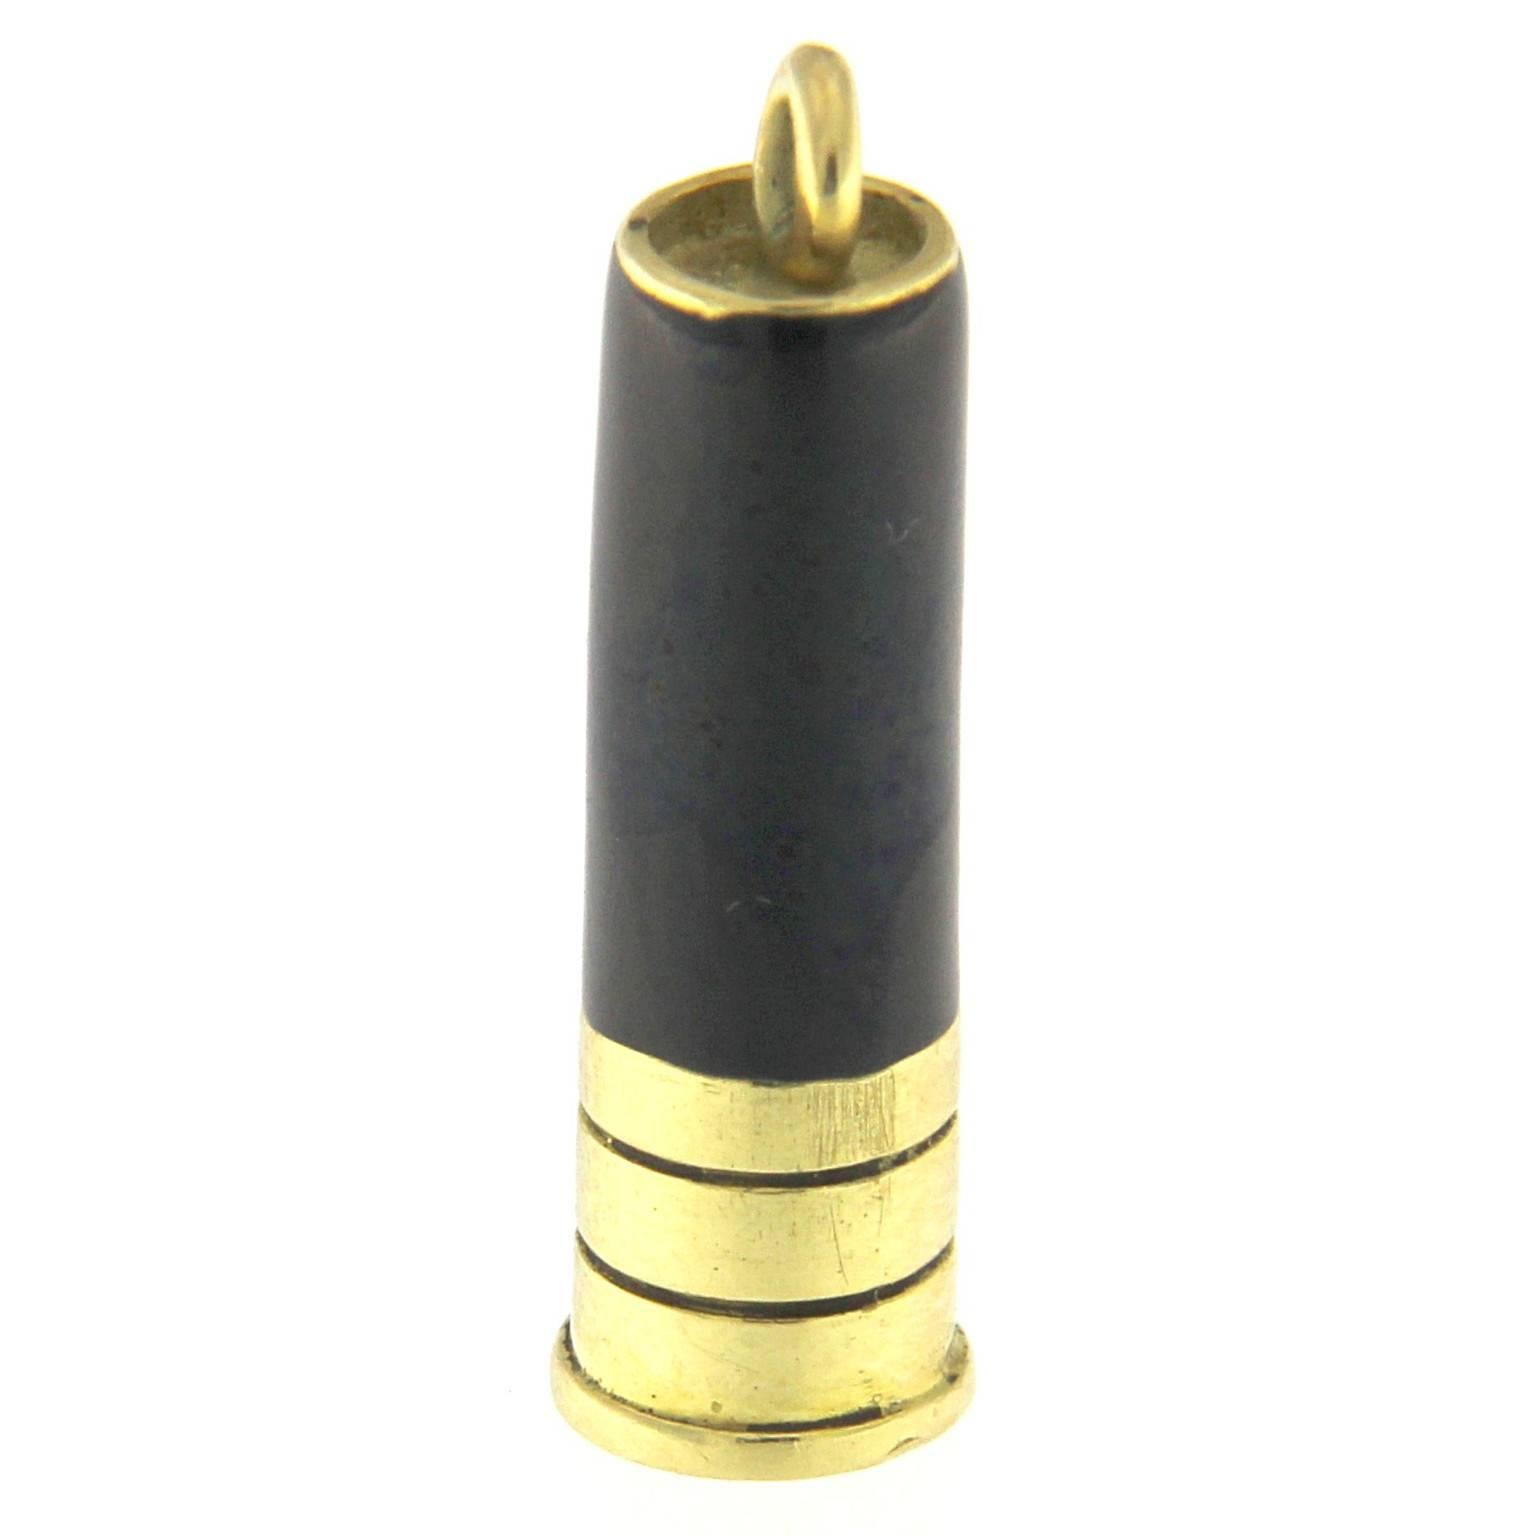 Black enameled bullet in 18 kt yellow gold
The total weight of the gold is gr 4.70
Stamp: 750